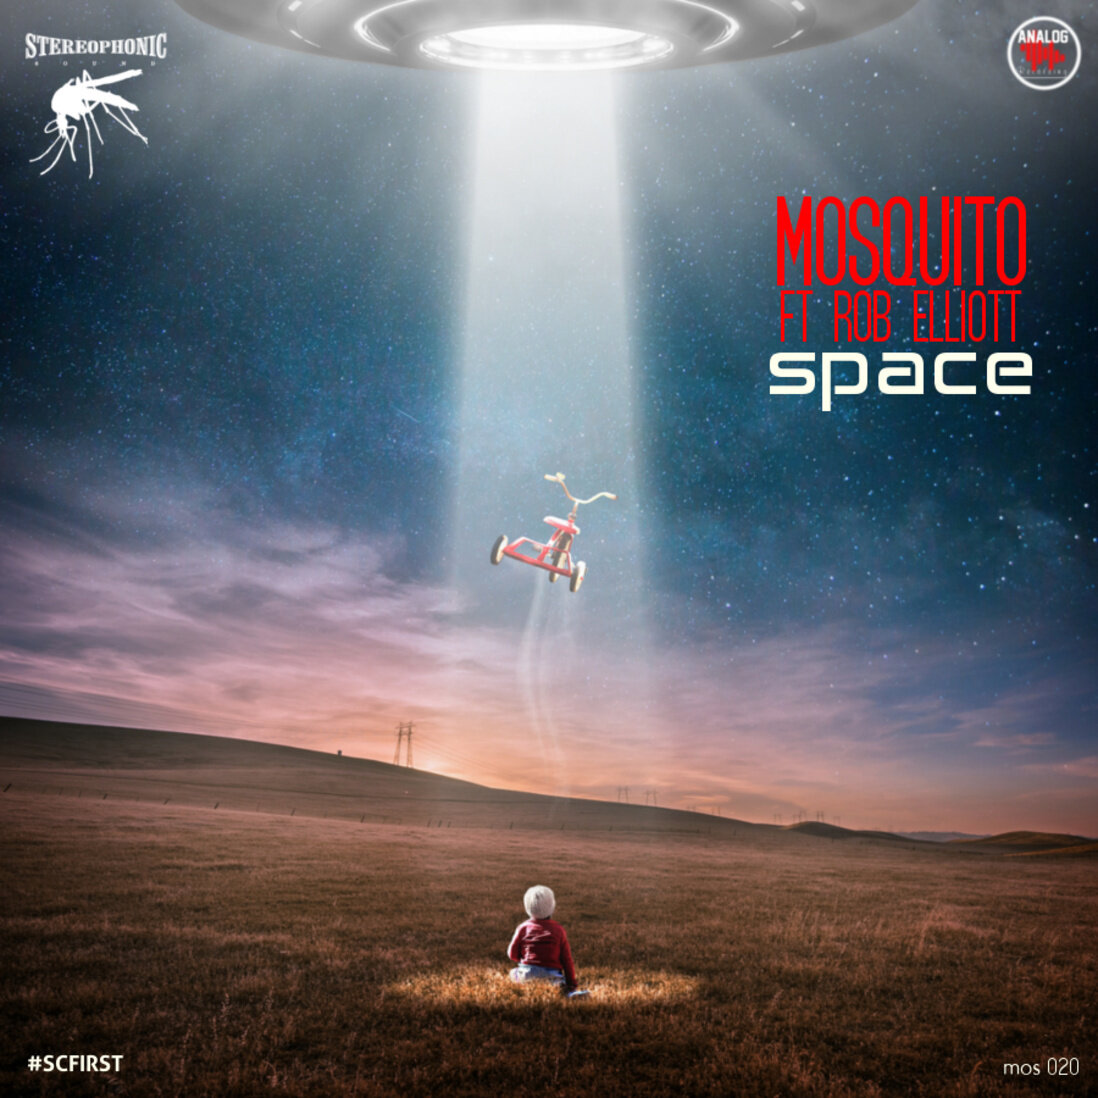 https://soundcloud.com/mattmosquito/space-mosquito-ft-rob-elliott

This track is exclusive to Soundcloud as part of the #SCFIRST Please take a listen and follow and repost if you like... &quot;We Are Not Alone&quot; someone is out there watching YOU!